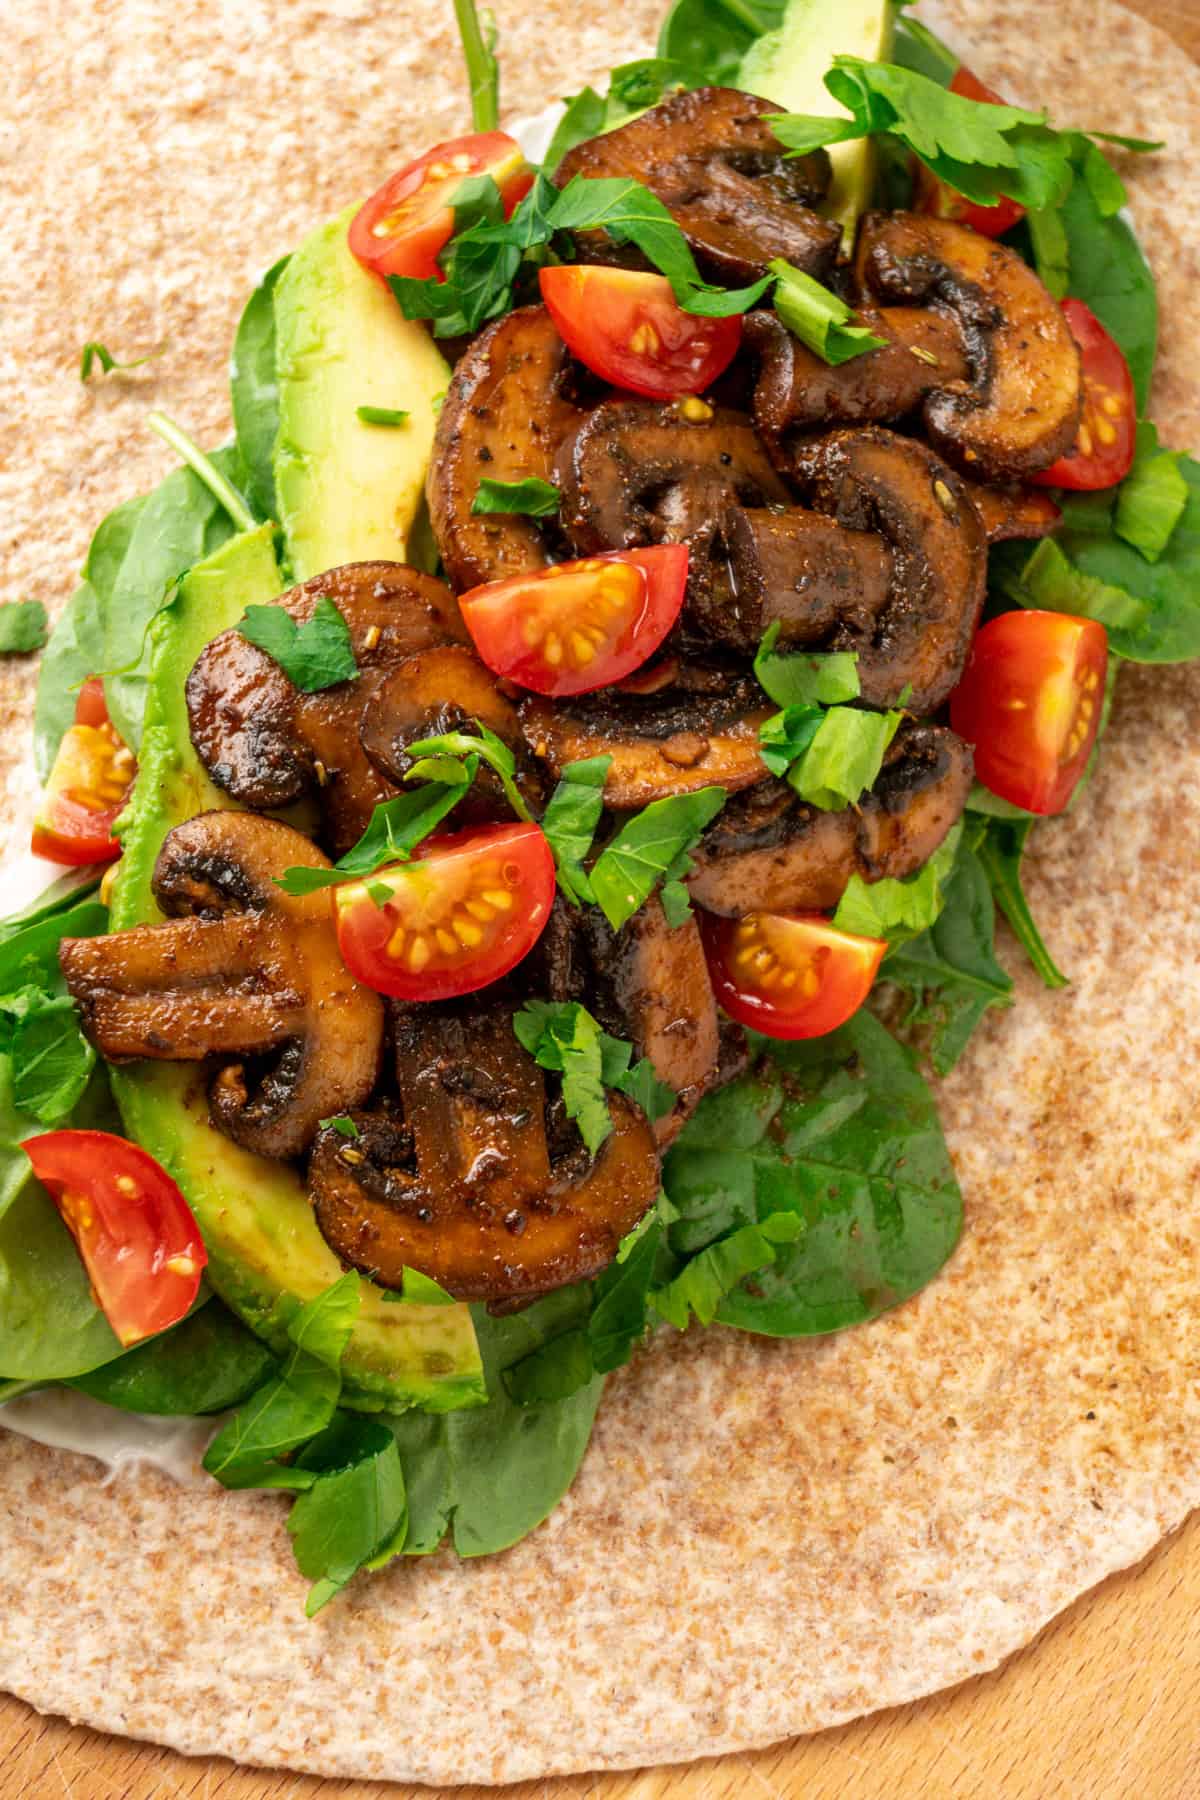 A tortilla wrap topped with mayo, spinach, cherry tomatoes, sauteed mushrooms and chopped parsley.